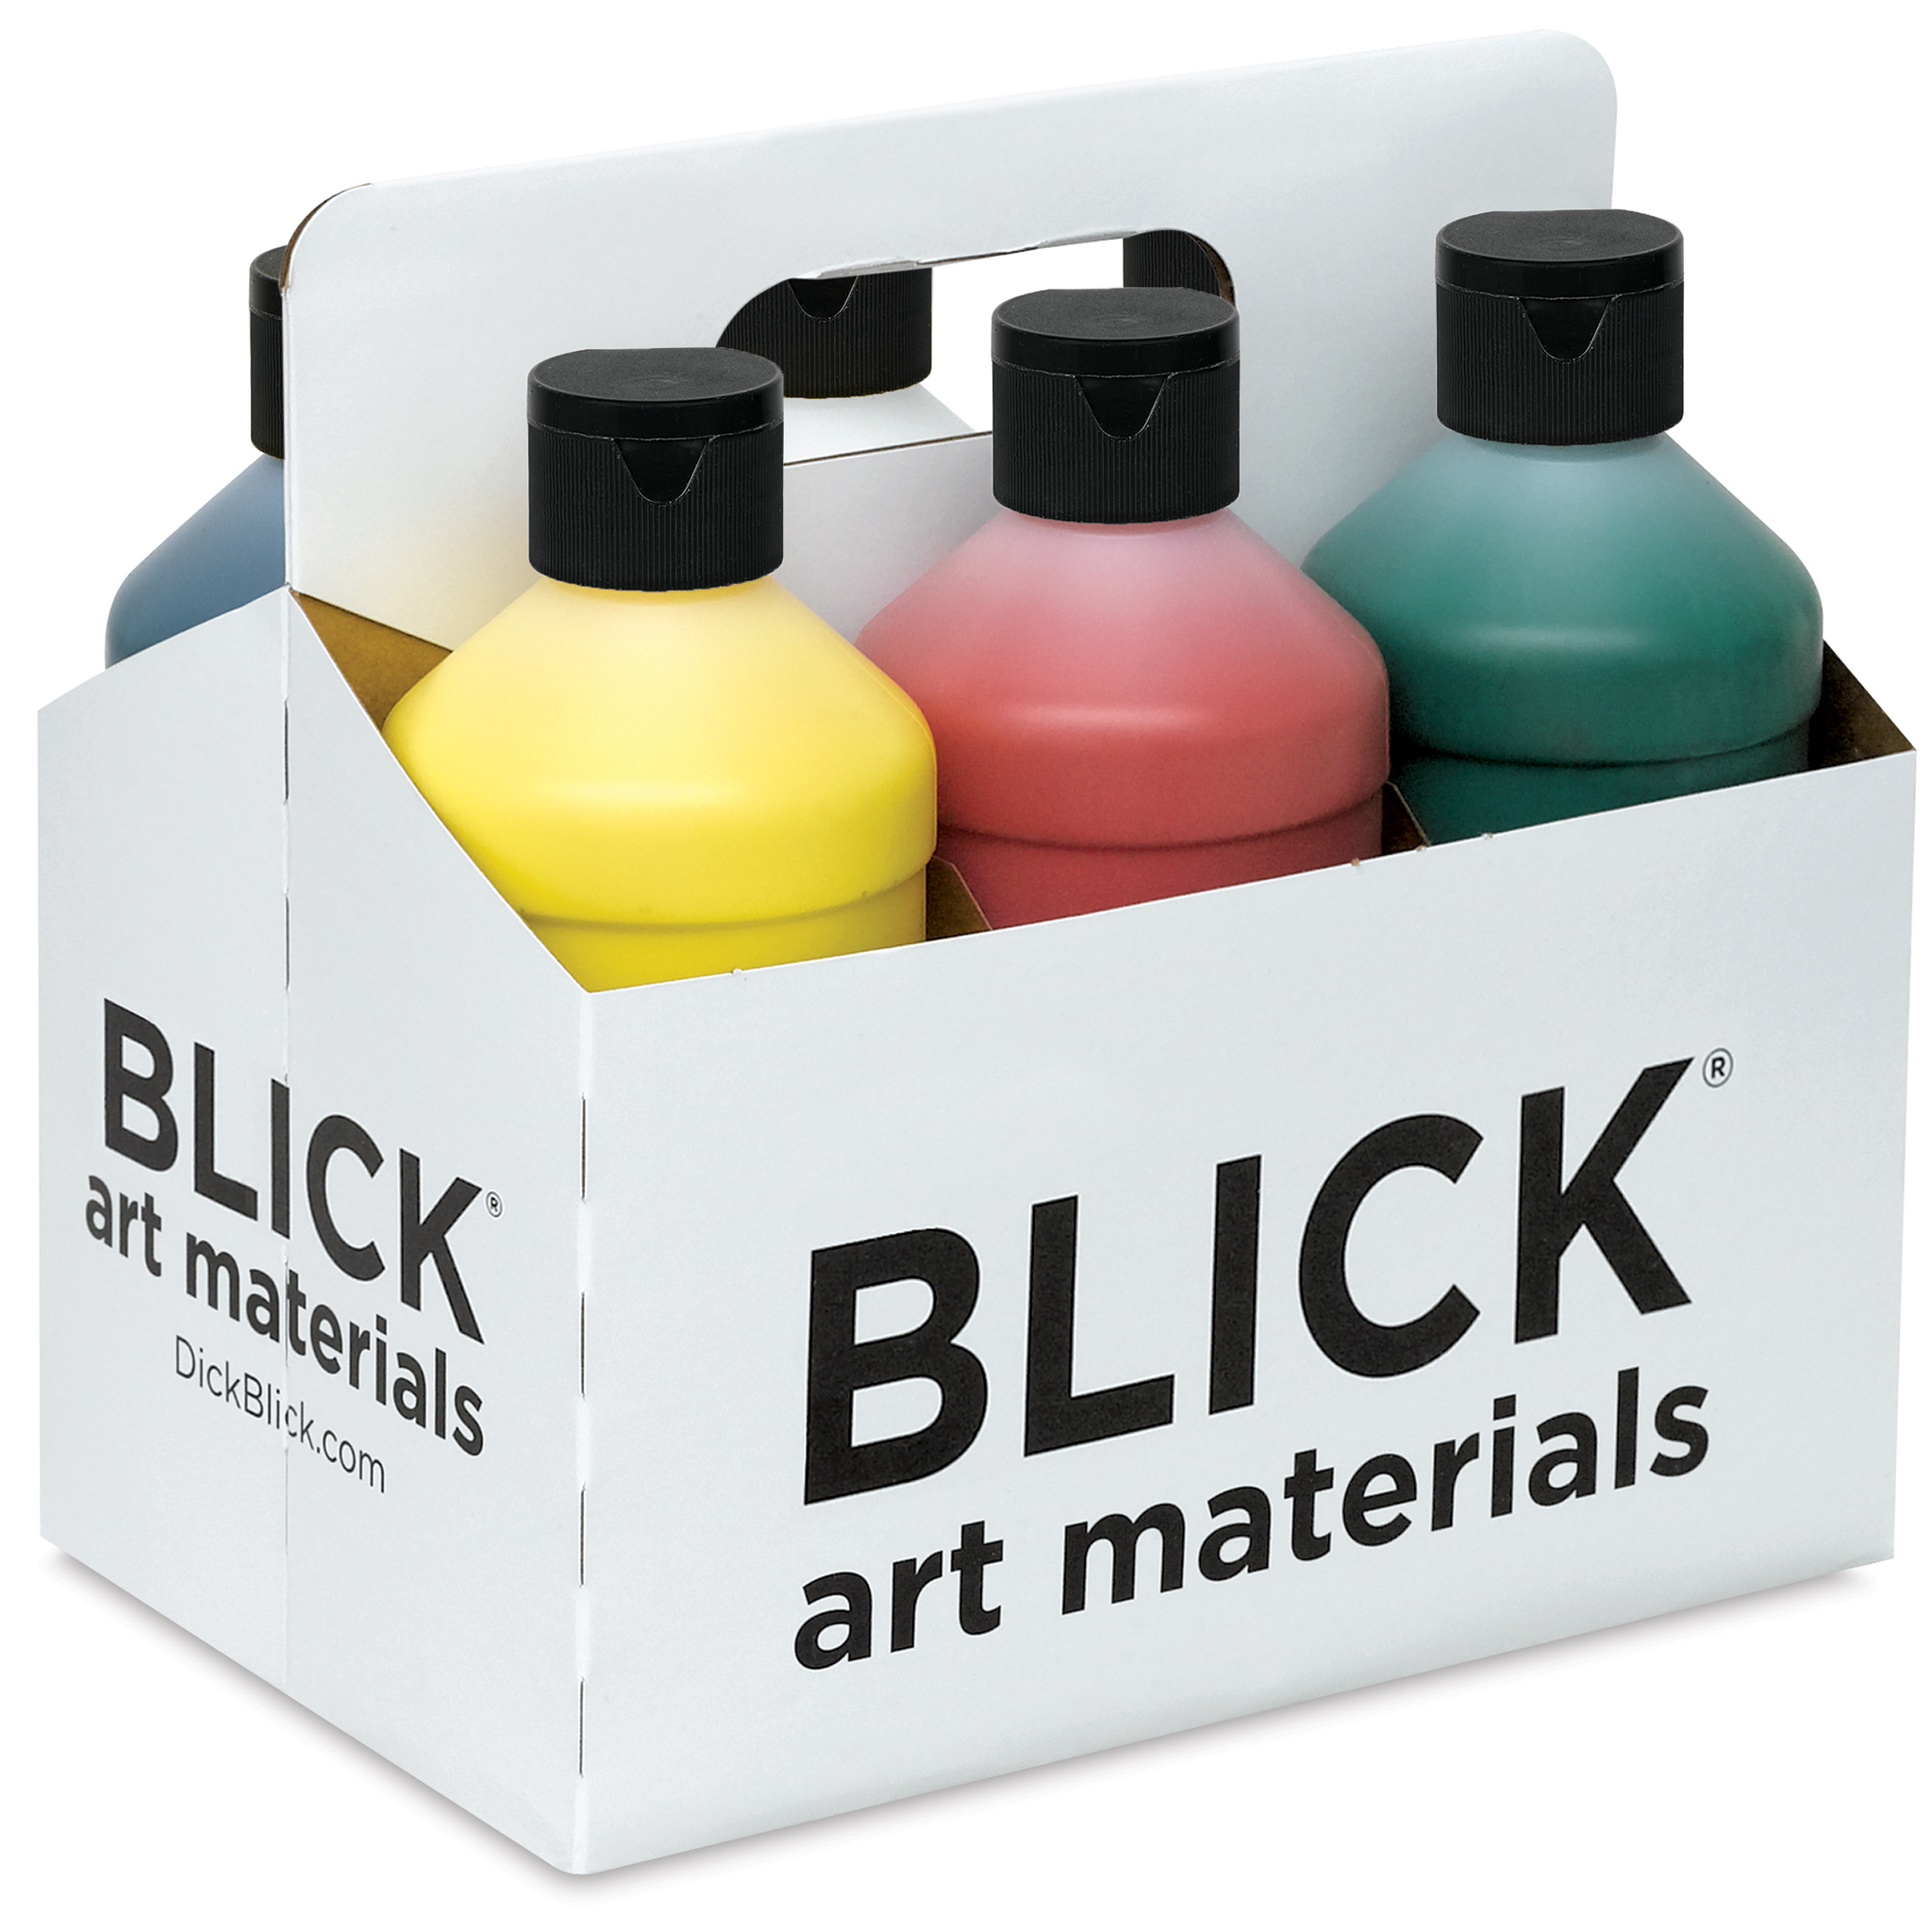 Blick Art Materials is Back in the Loop